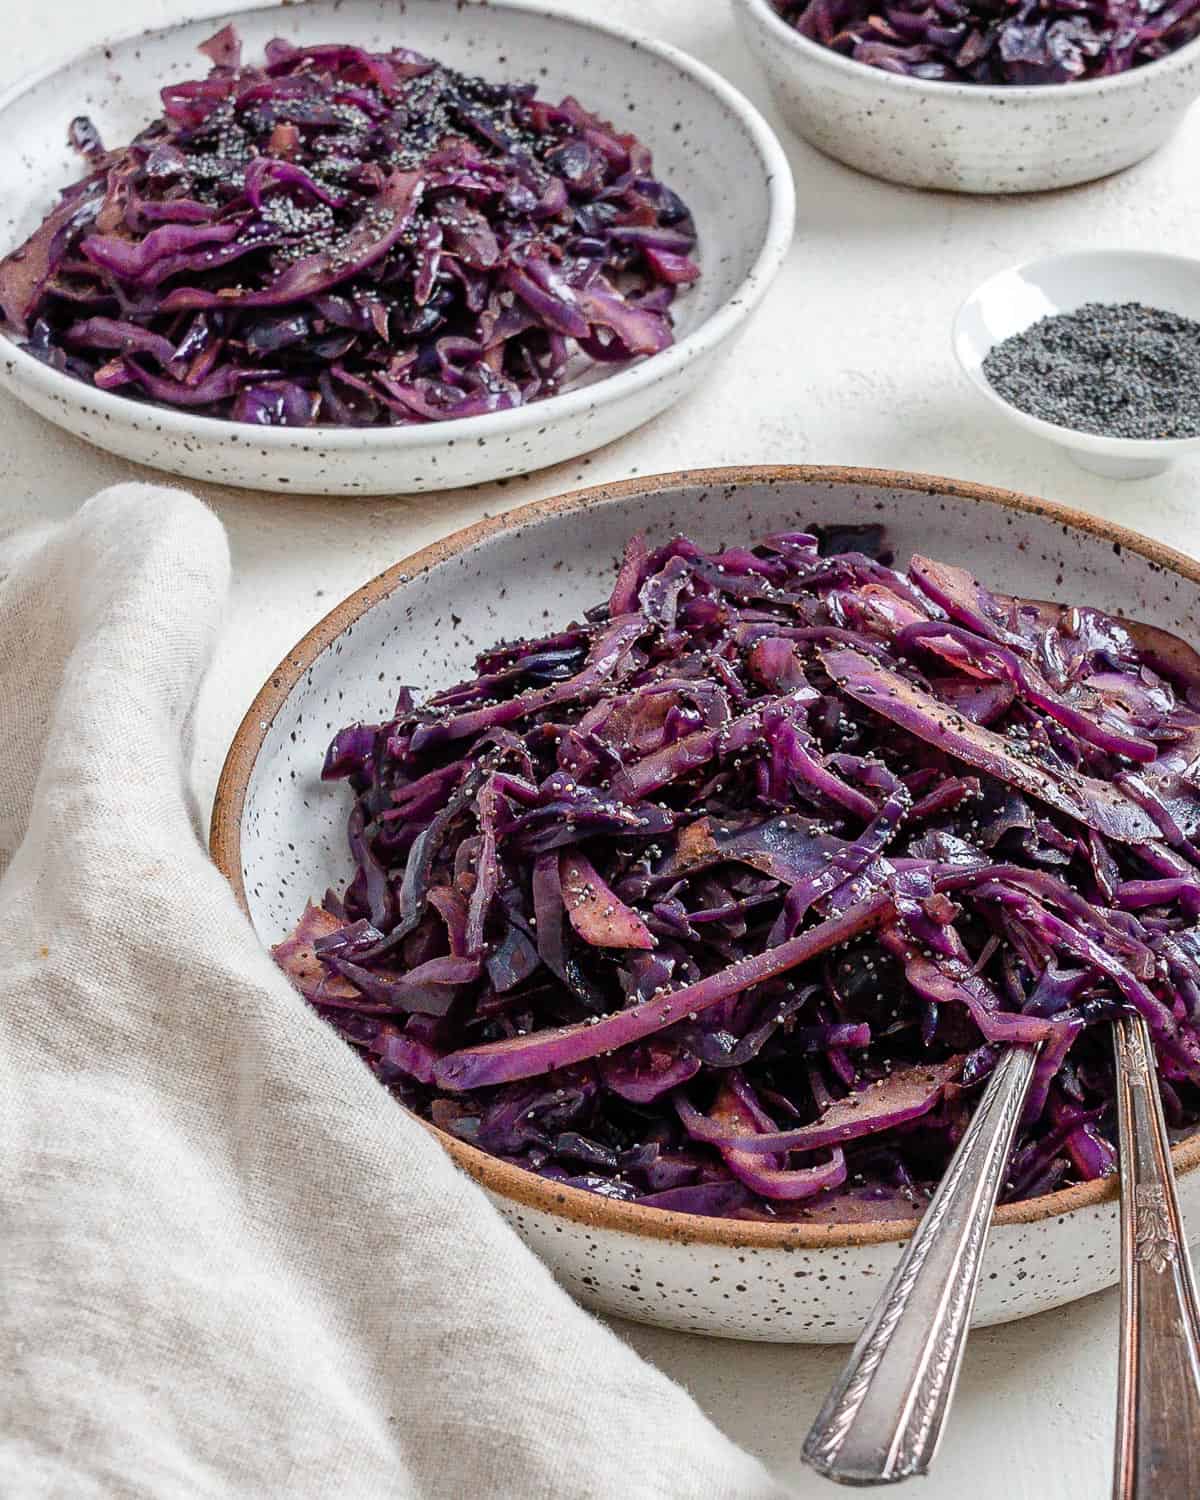 completed Easy Vegan Fried Cabbage plated in a bowl against a light background